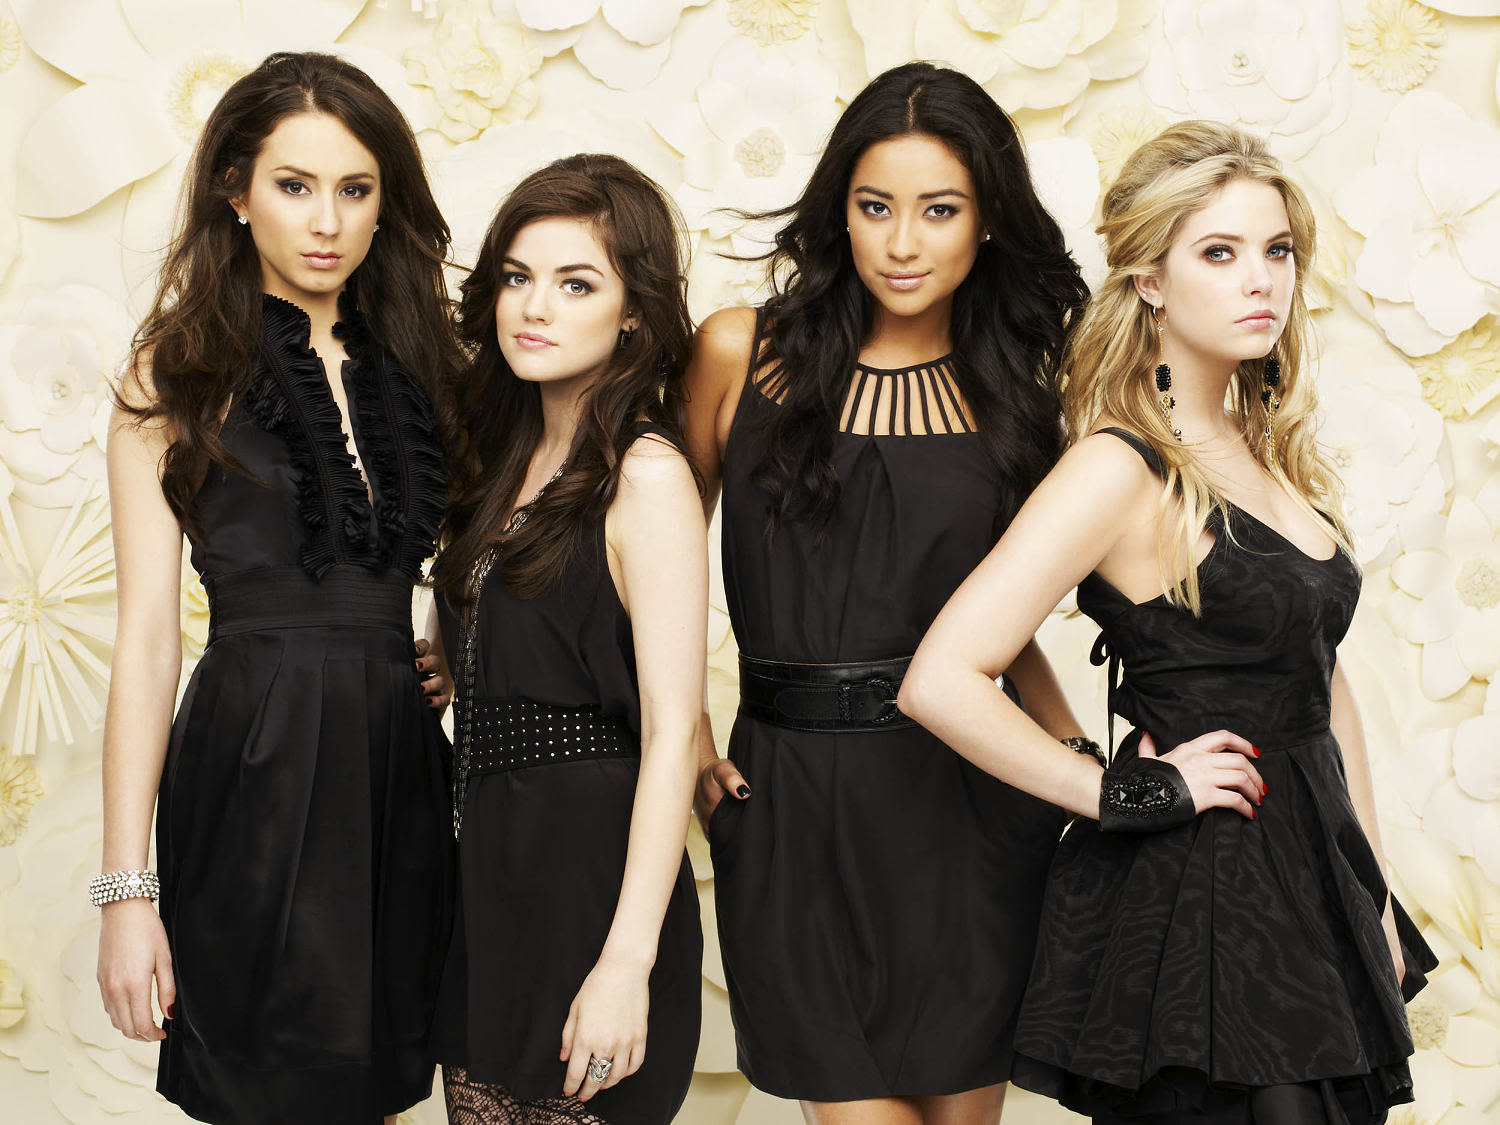 ‘Pretty Little Liars’ cast: Where are they now?